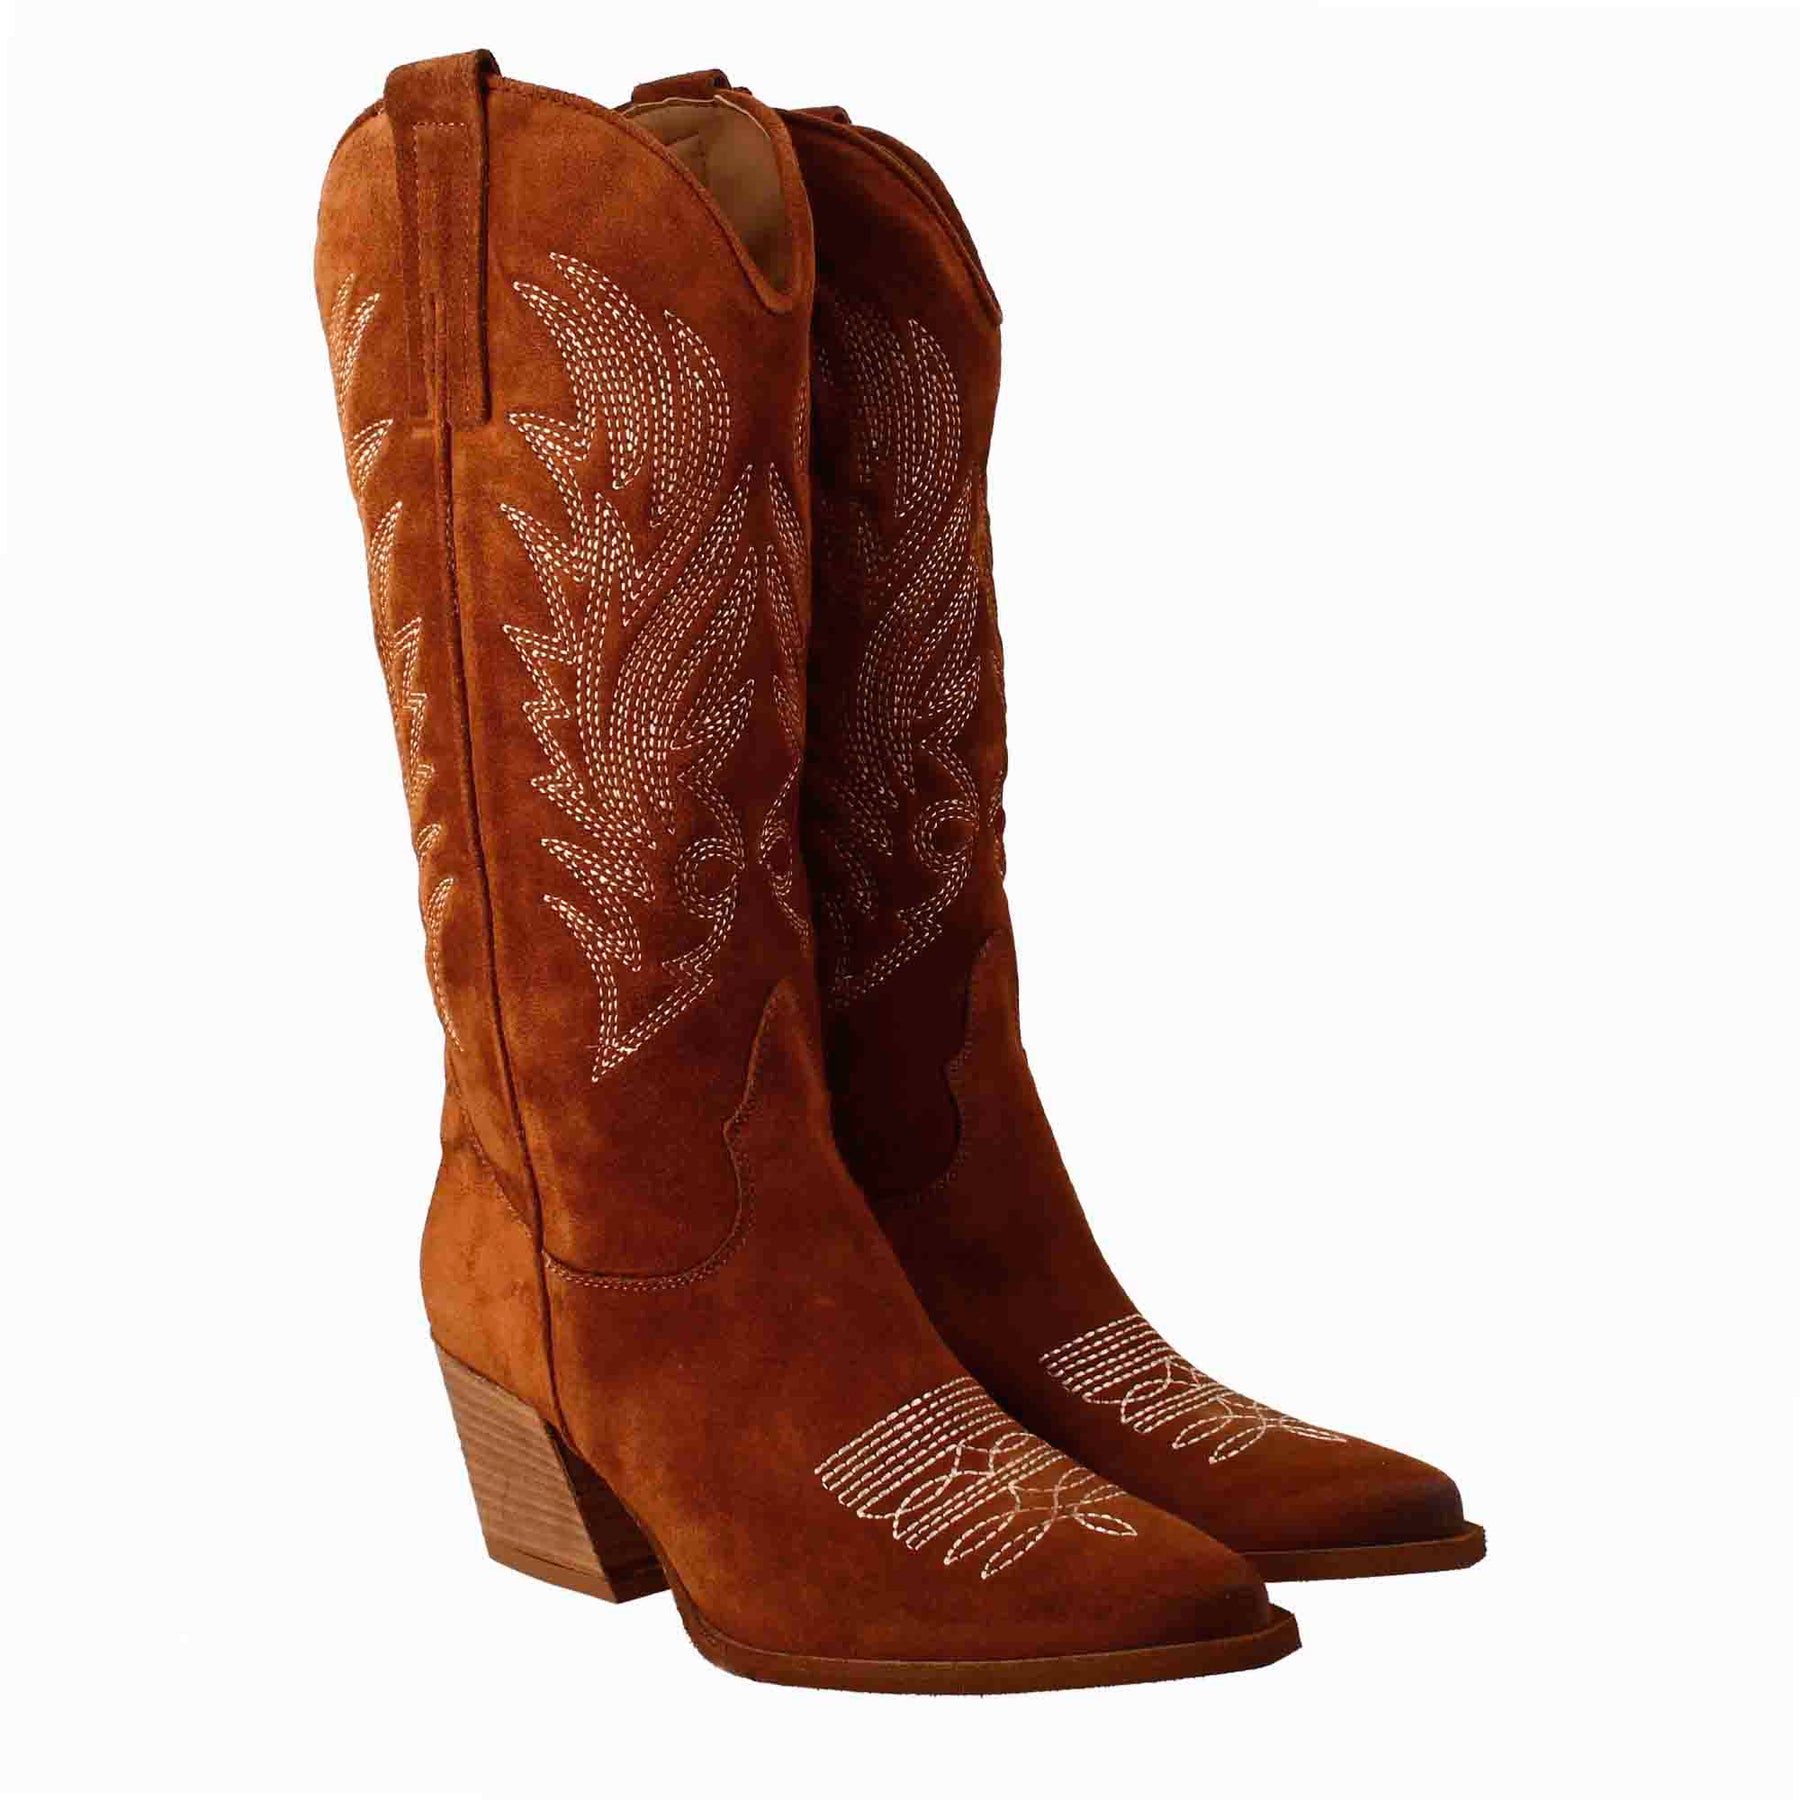 Women's medium Texan boots in brown suede with embroidery.